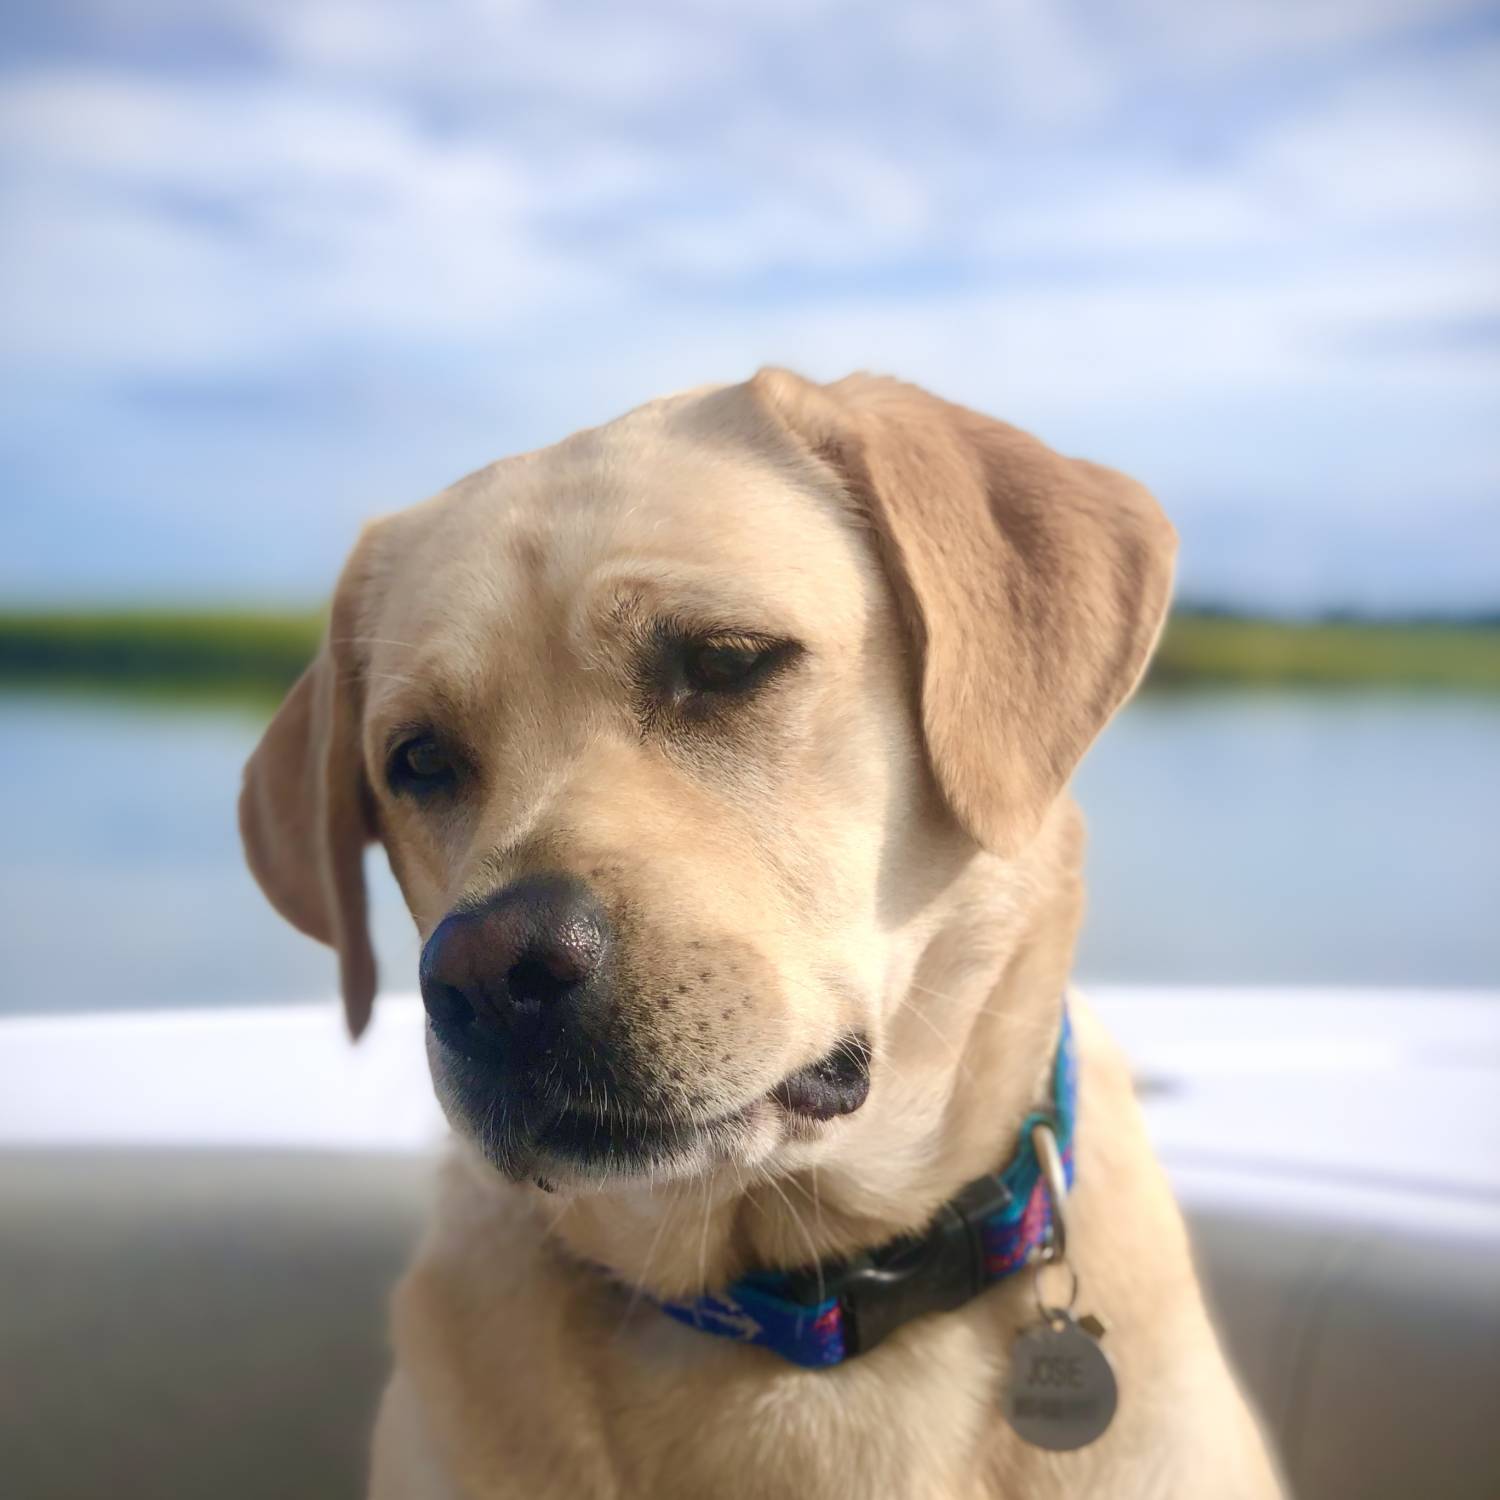 Title: Josie’s first ride - On board their Sportsman Heritage 231 Center Console - Location: Lady’s Island, SC. Participating in the Photo Contest #SportsmanSeptember